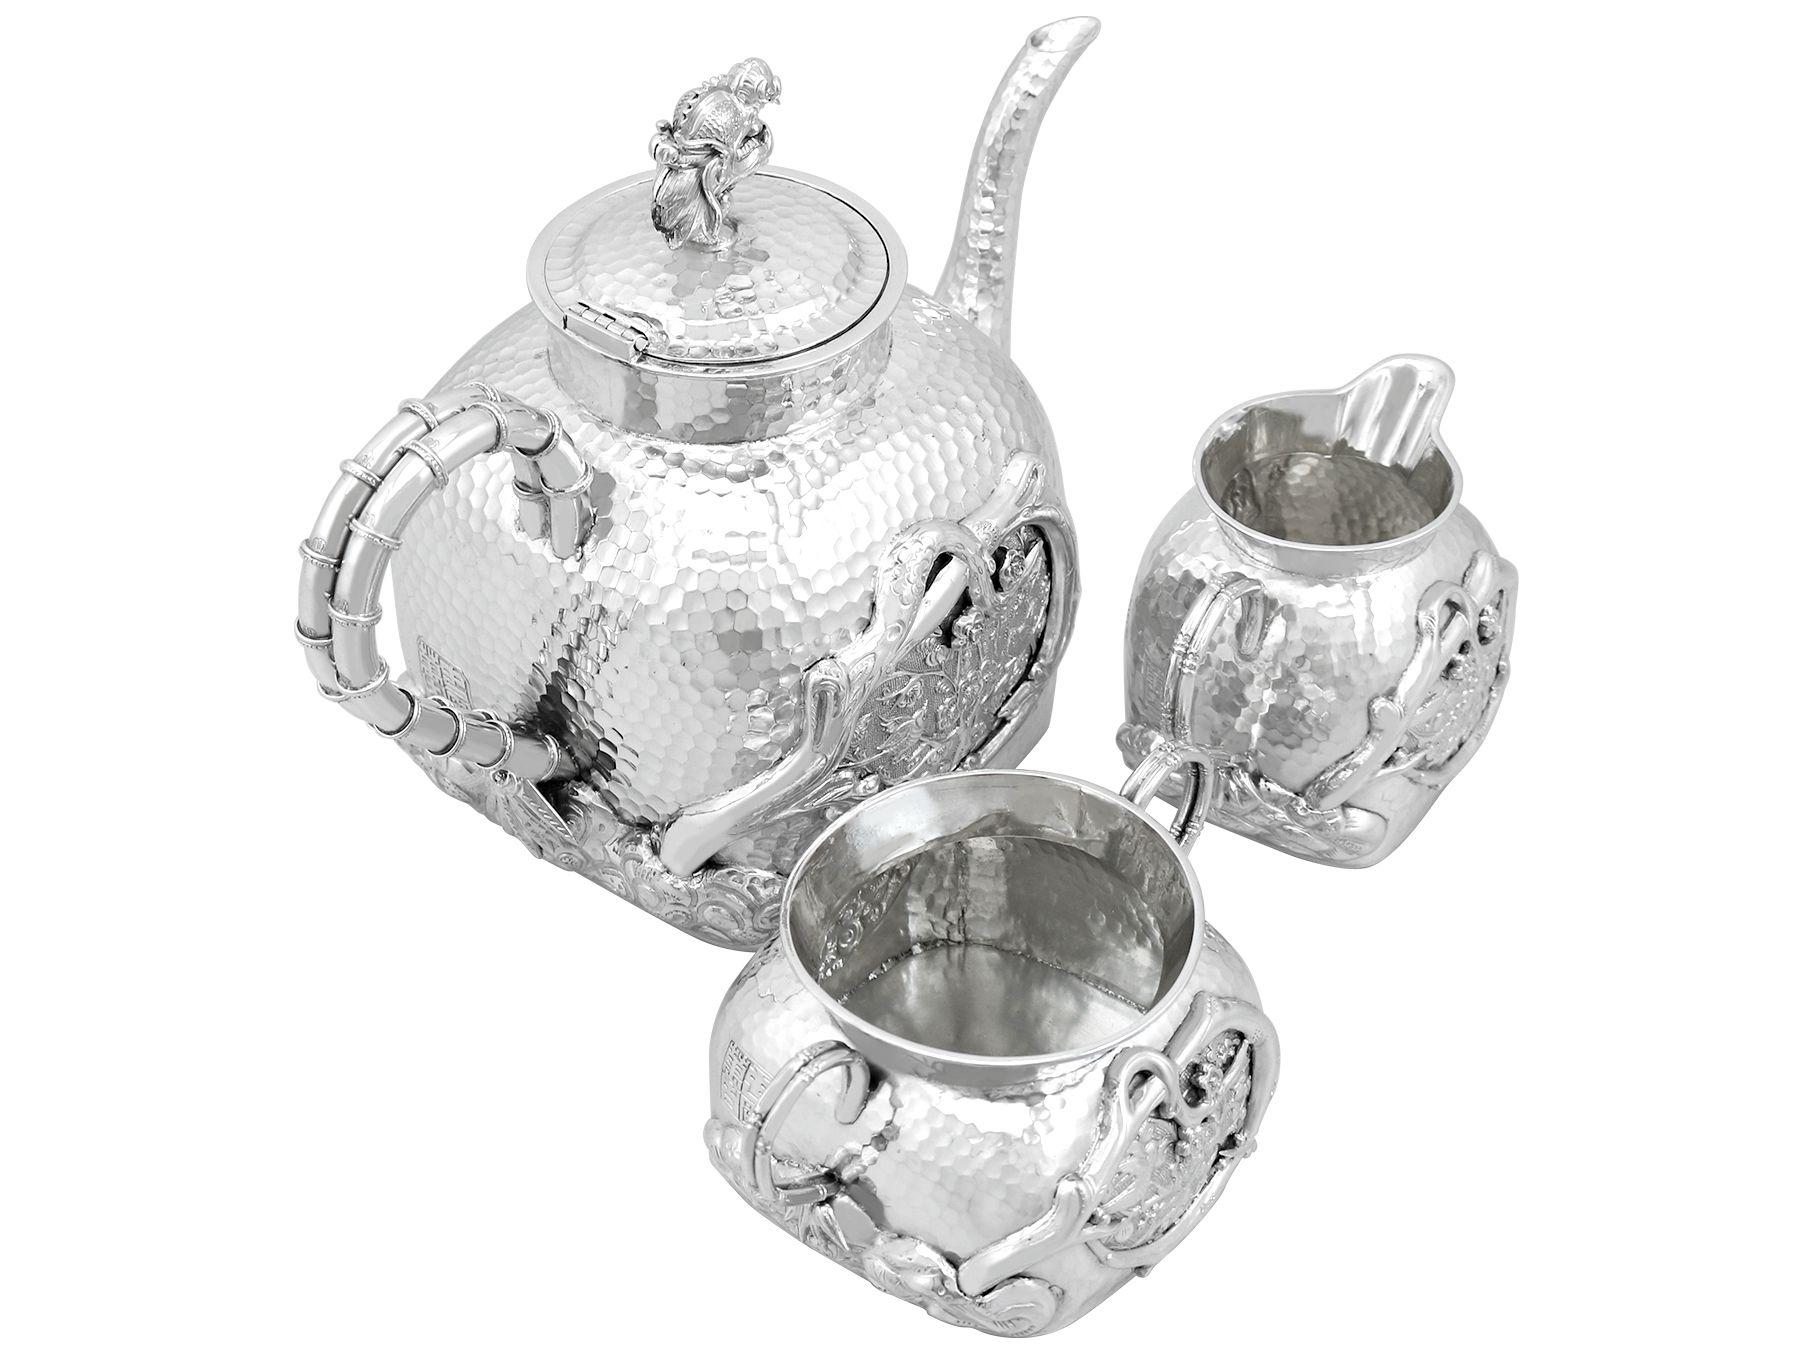 An exceptional, fine and impressive antique Chinese export silver three piece tea service; an addition to our diverse silver teaware collection

This exceptional antique Chinese Export Silver tea service consists of a teapot, cream jug and sugar